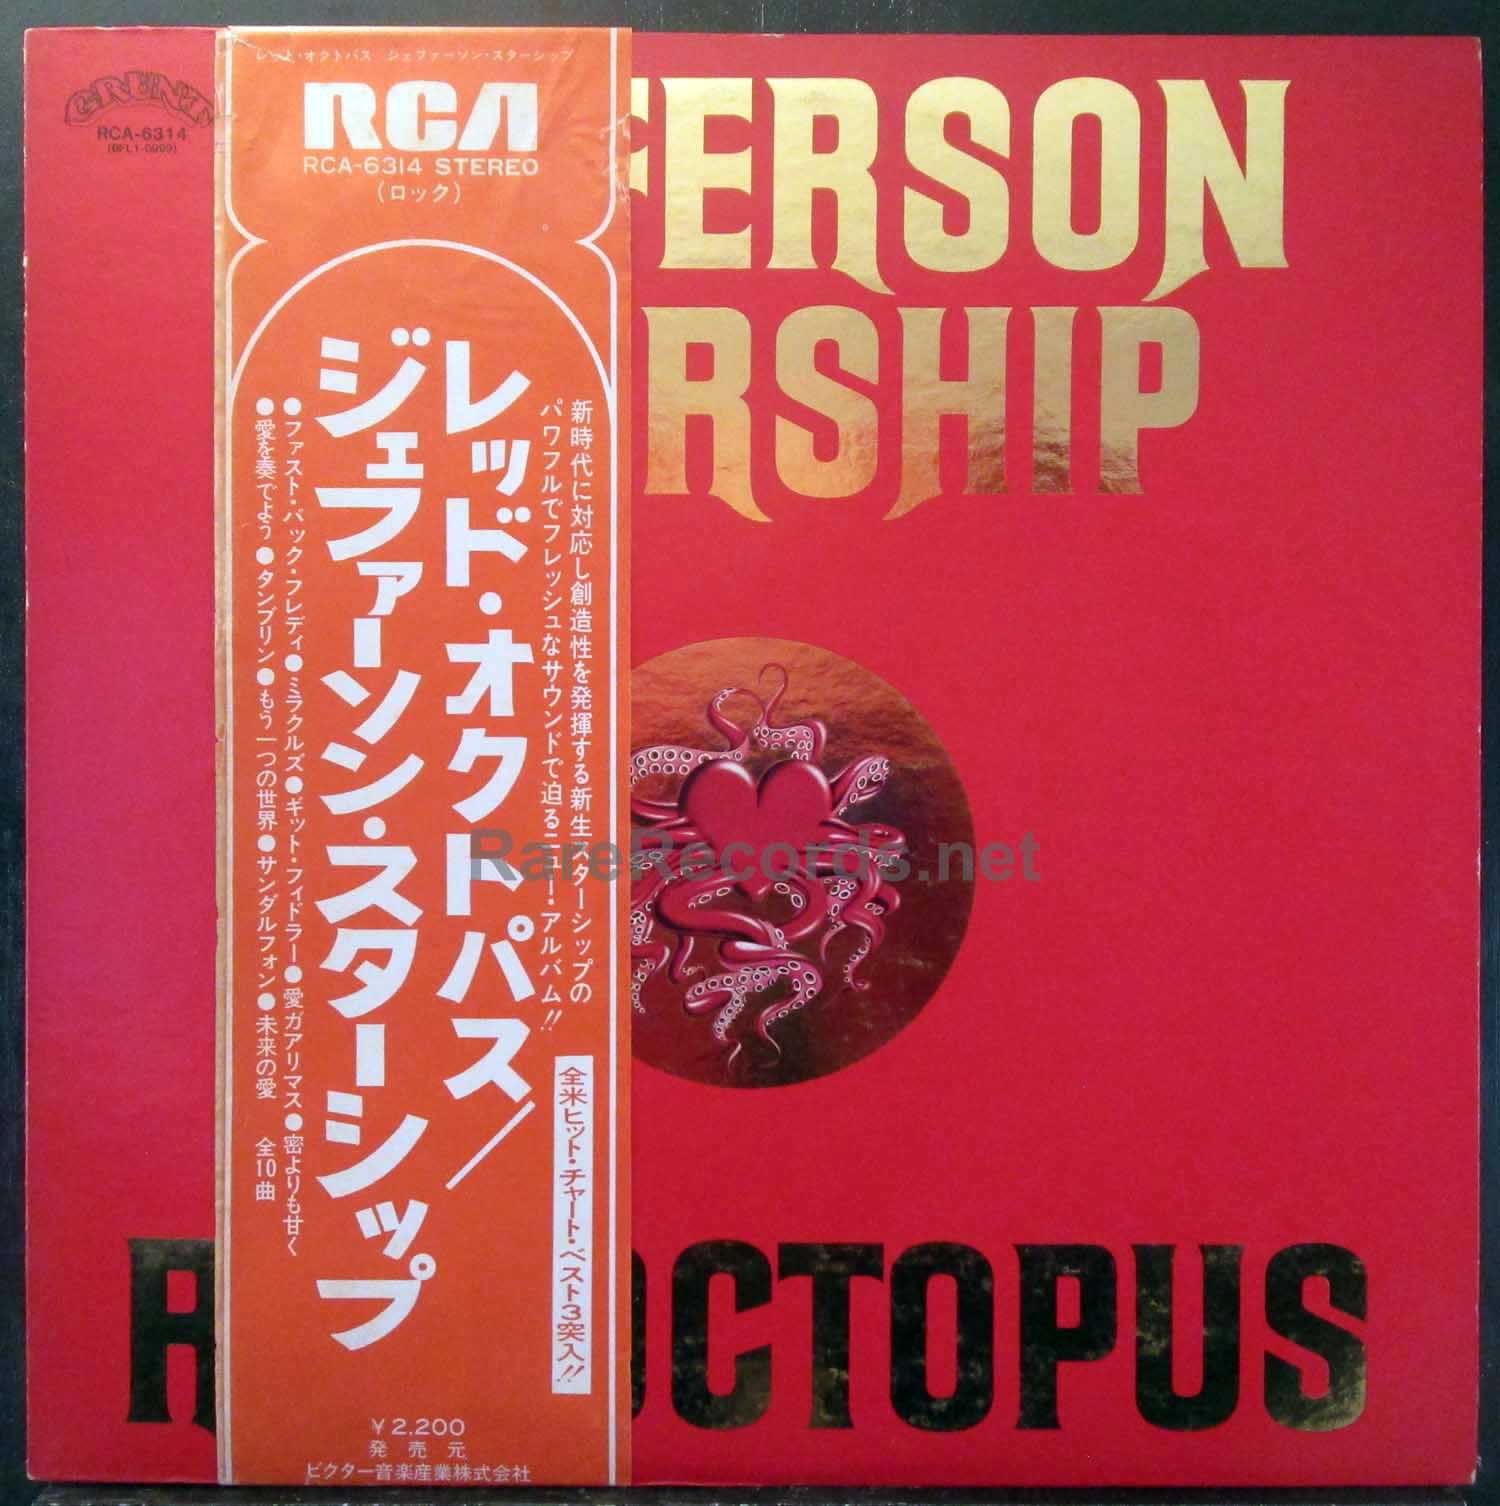 Jefferson Starship – Red Octopus Japan white label promotional LP with